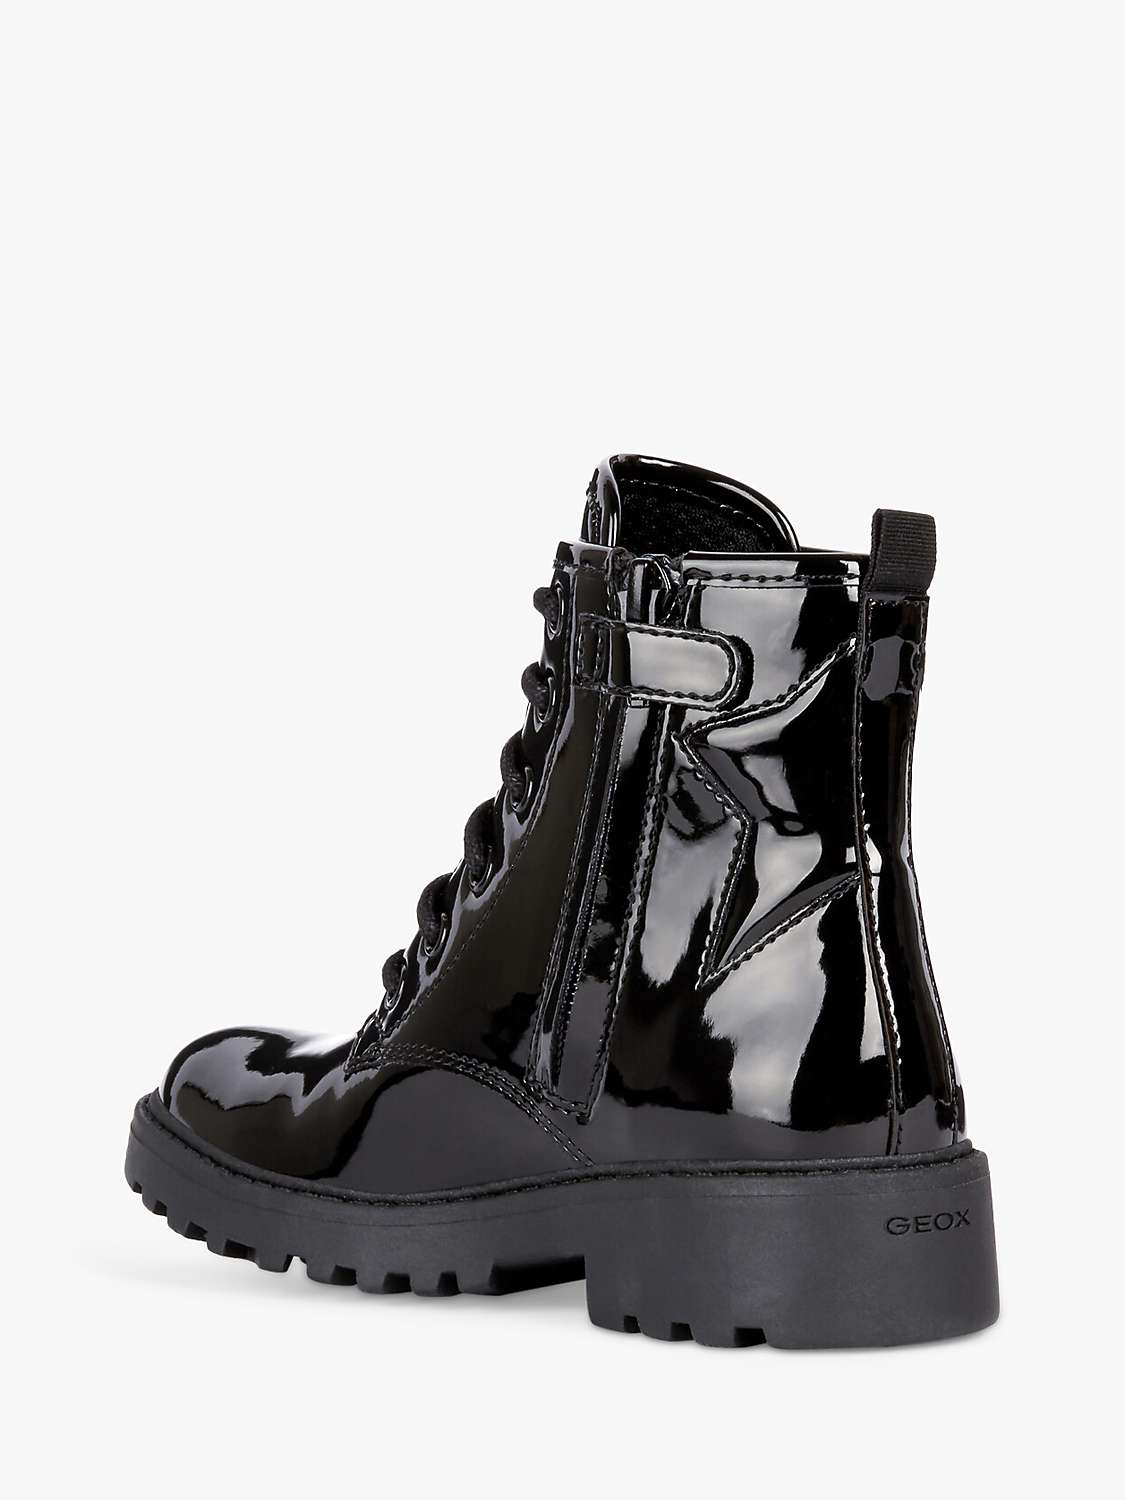 Buy Geox Kids' Casey Patent Ankle Boots Online at johnlewis.com